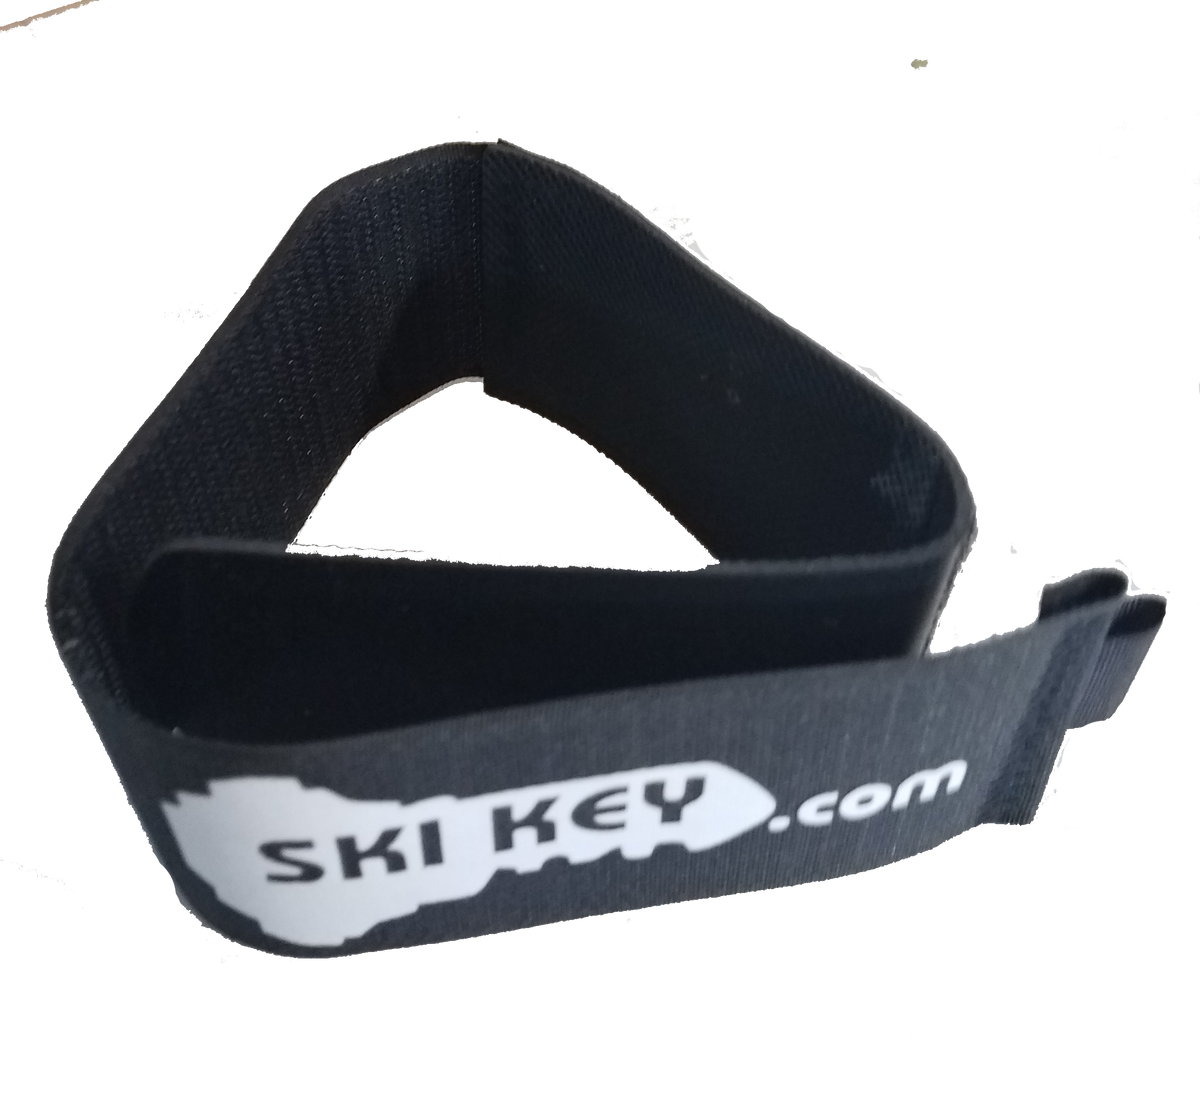 Ski Straps Extra Strong & Wide - 1 Pair Of Durable Hook and Loop Ski Ties